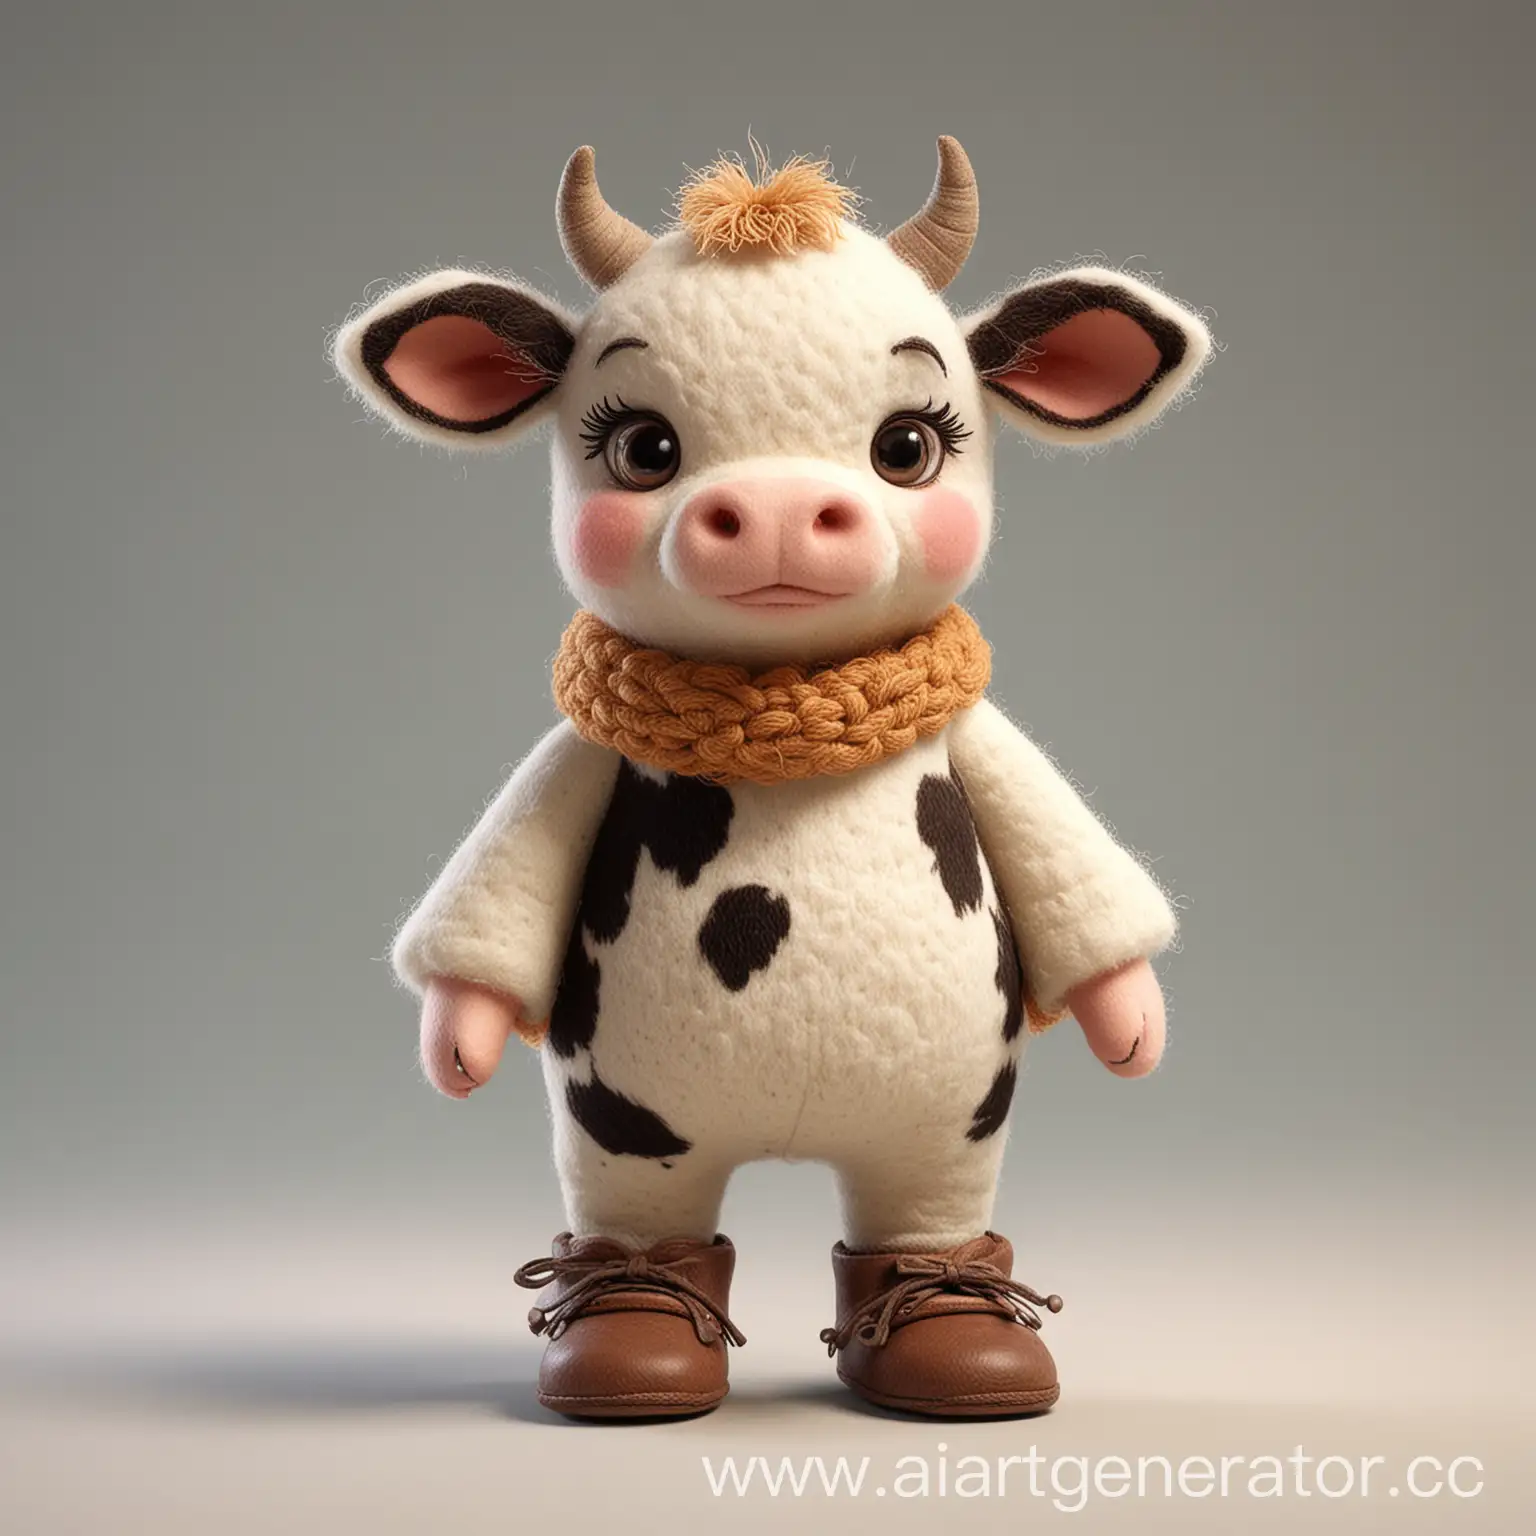 Adorable-Baby-Cow-Plush-Doll-Portrait-with-Anthropomorphic-Features